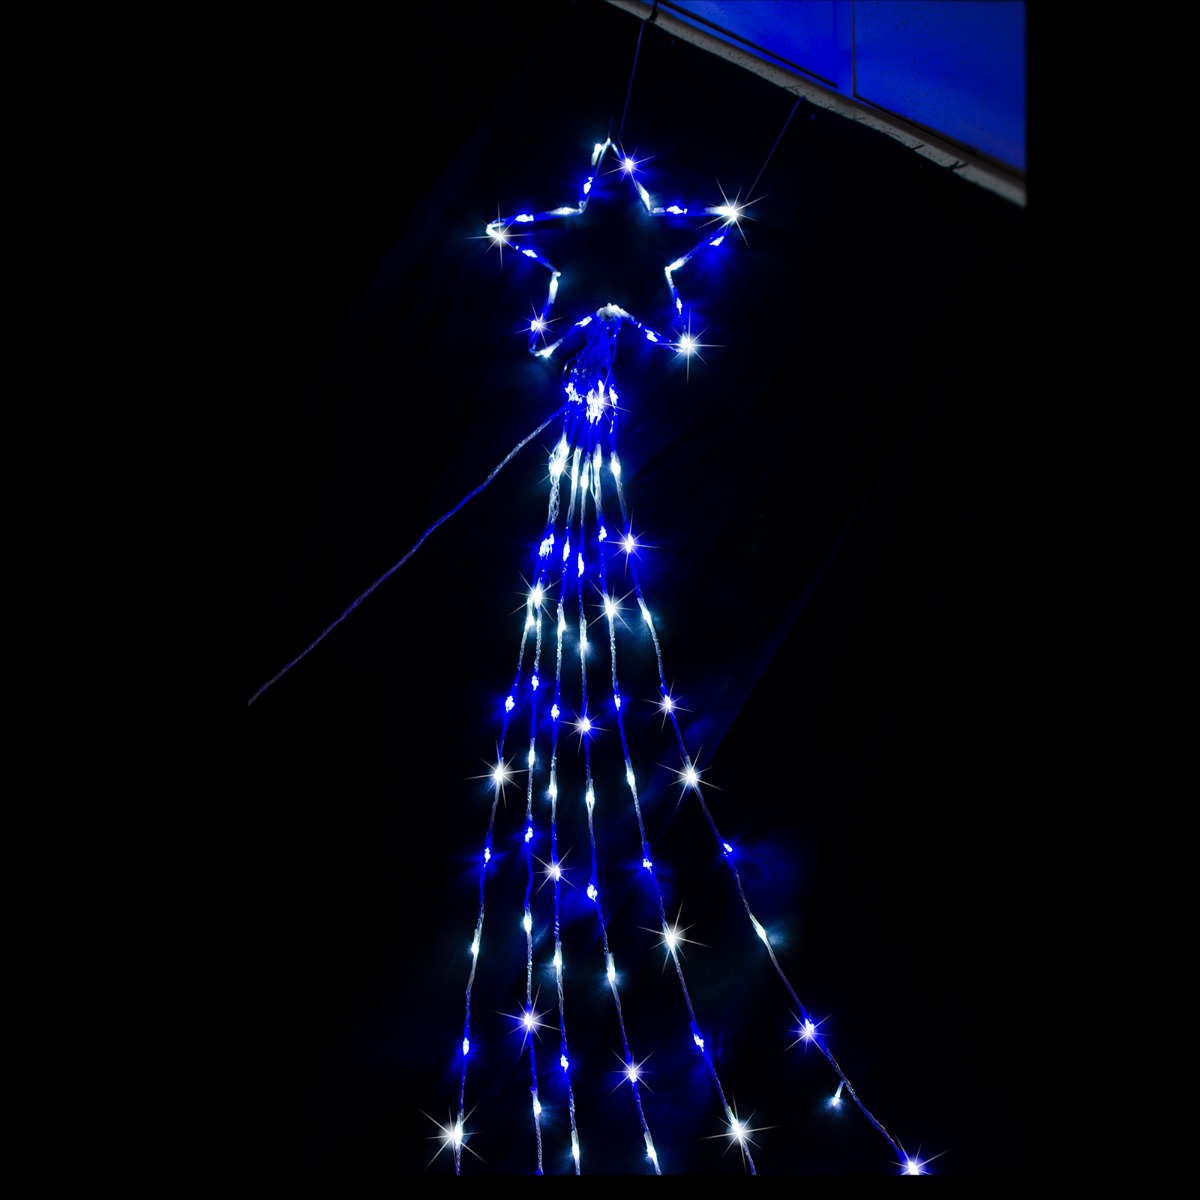 Stockholm Outdoor LED Waterfall Star 200 Blue & Cool White Bulbs Christmas Light Display 3m